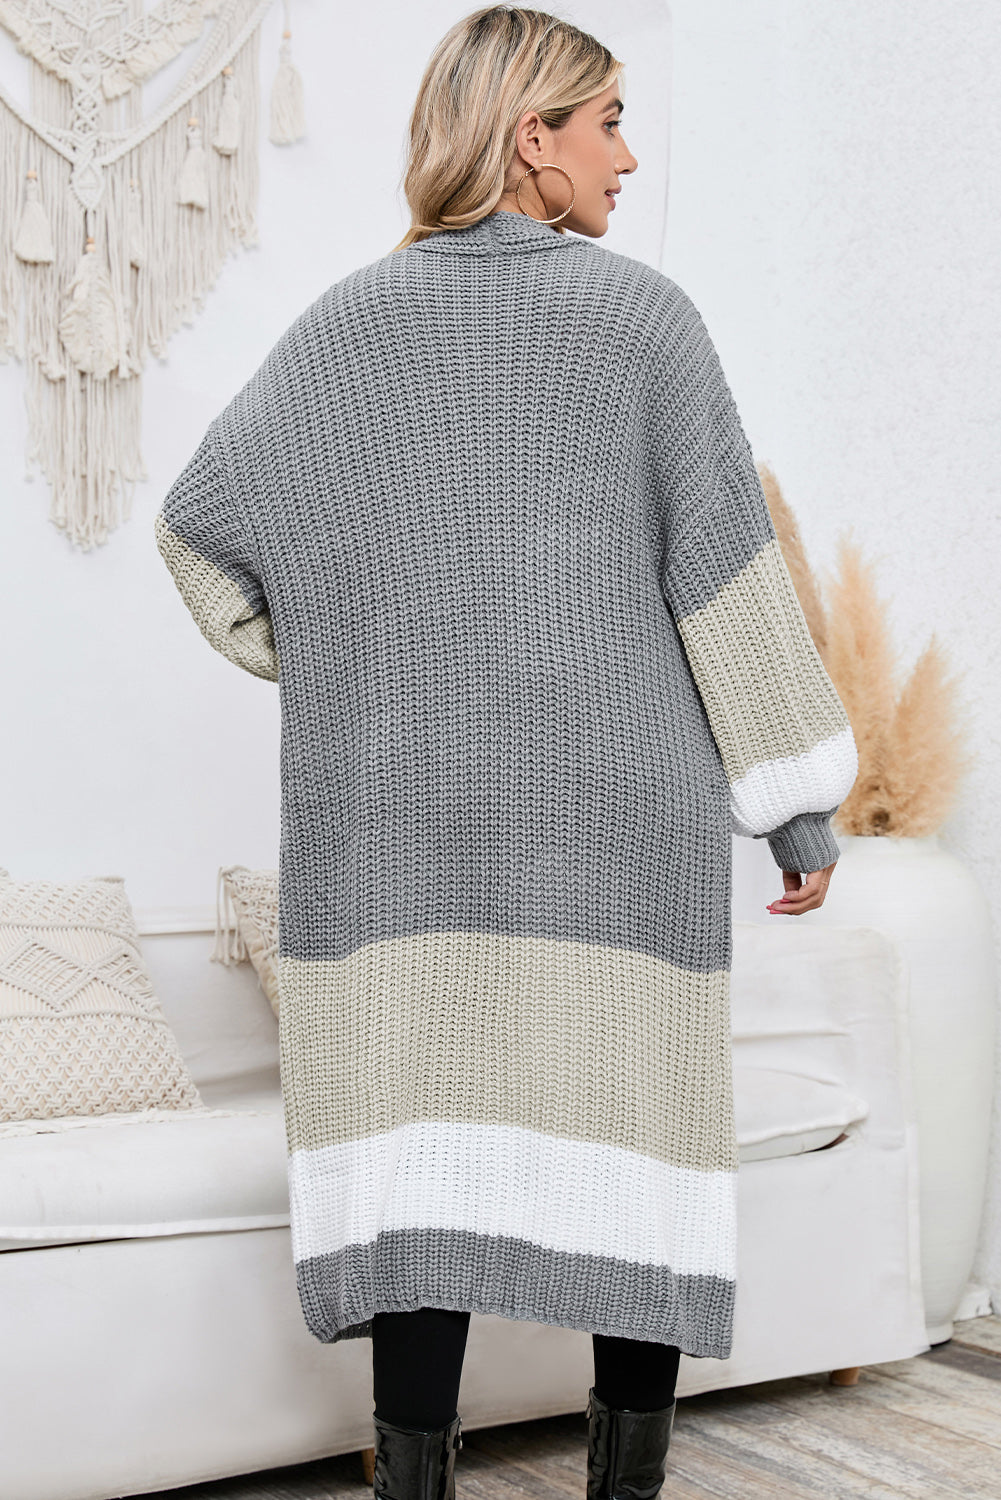 LC2711008-11-S, LC2711008-11-M, LC2711008-11-L, LC2711008-11-XL, Gray Colorblock Cable Knit Side Pockets Duster Cardigan